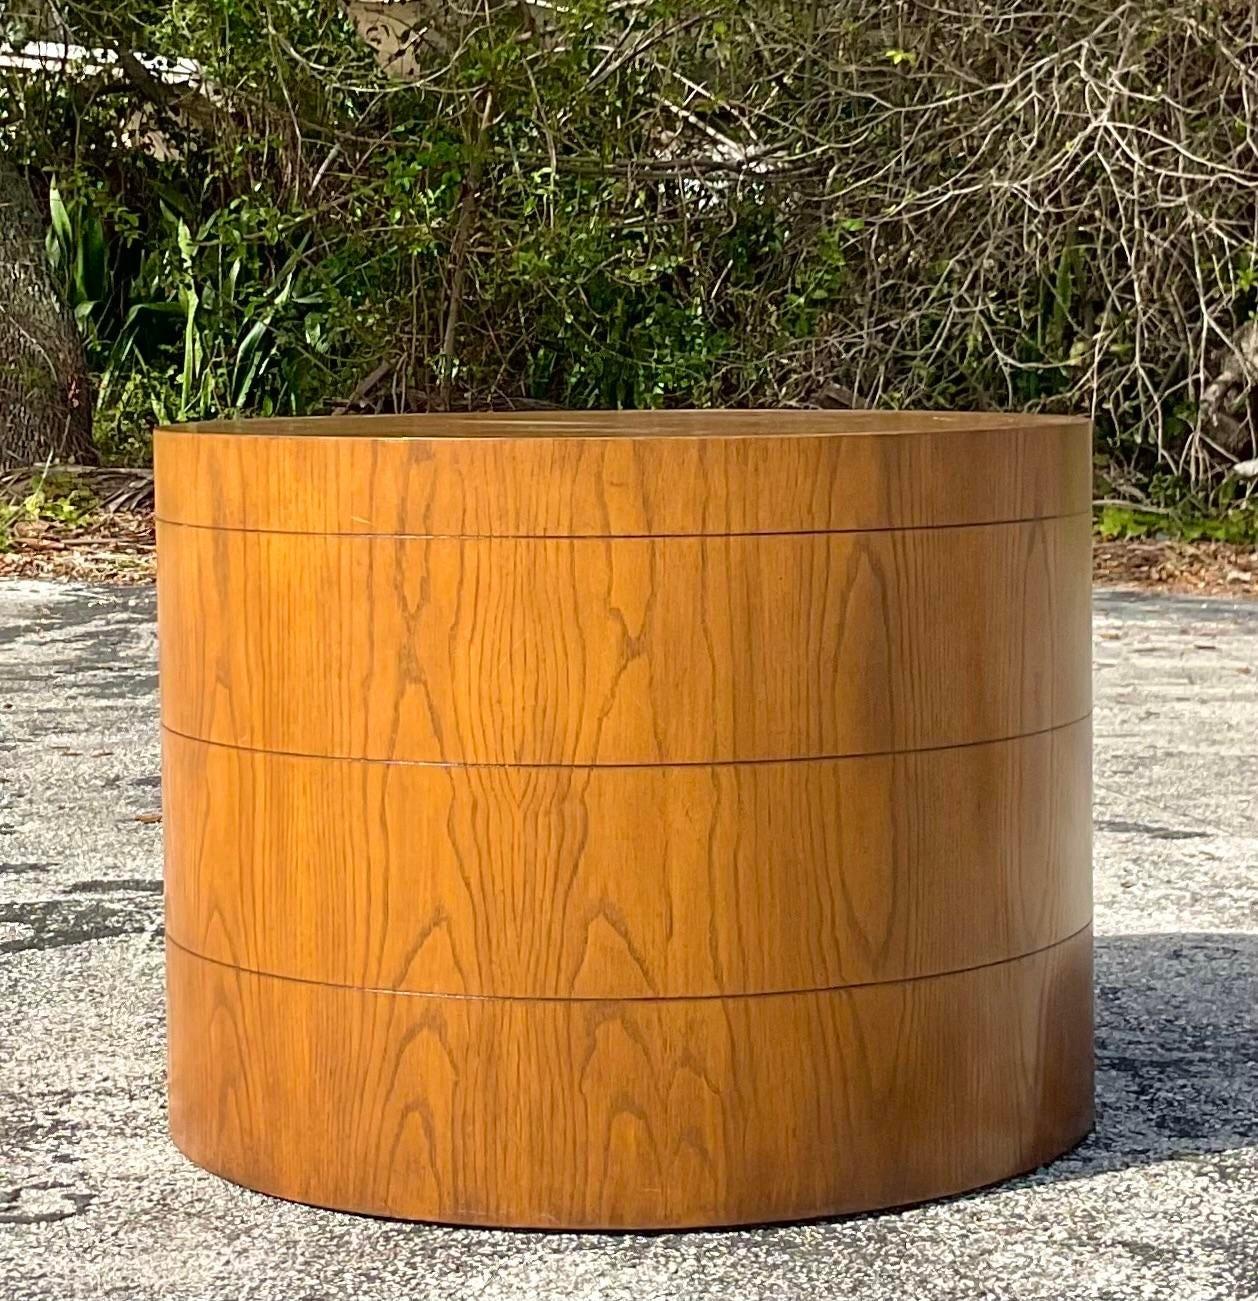 A stunning vintage Boho side table. A chic drum shape with beautiful wood grain detail. Three grouted bands along the side. Acquired from a Palm a each estate.